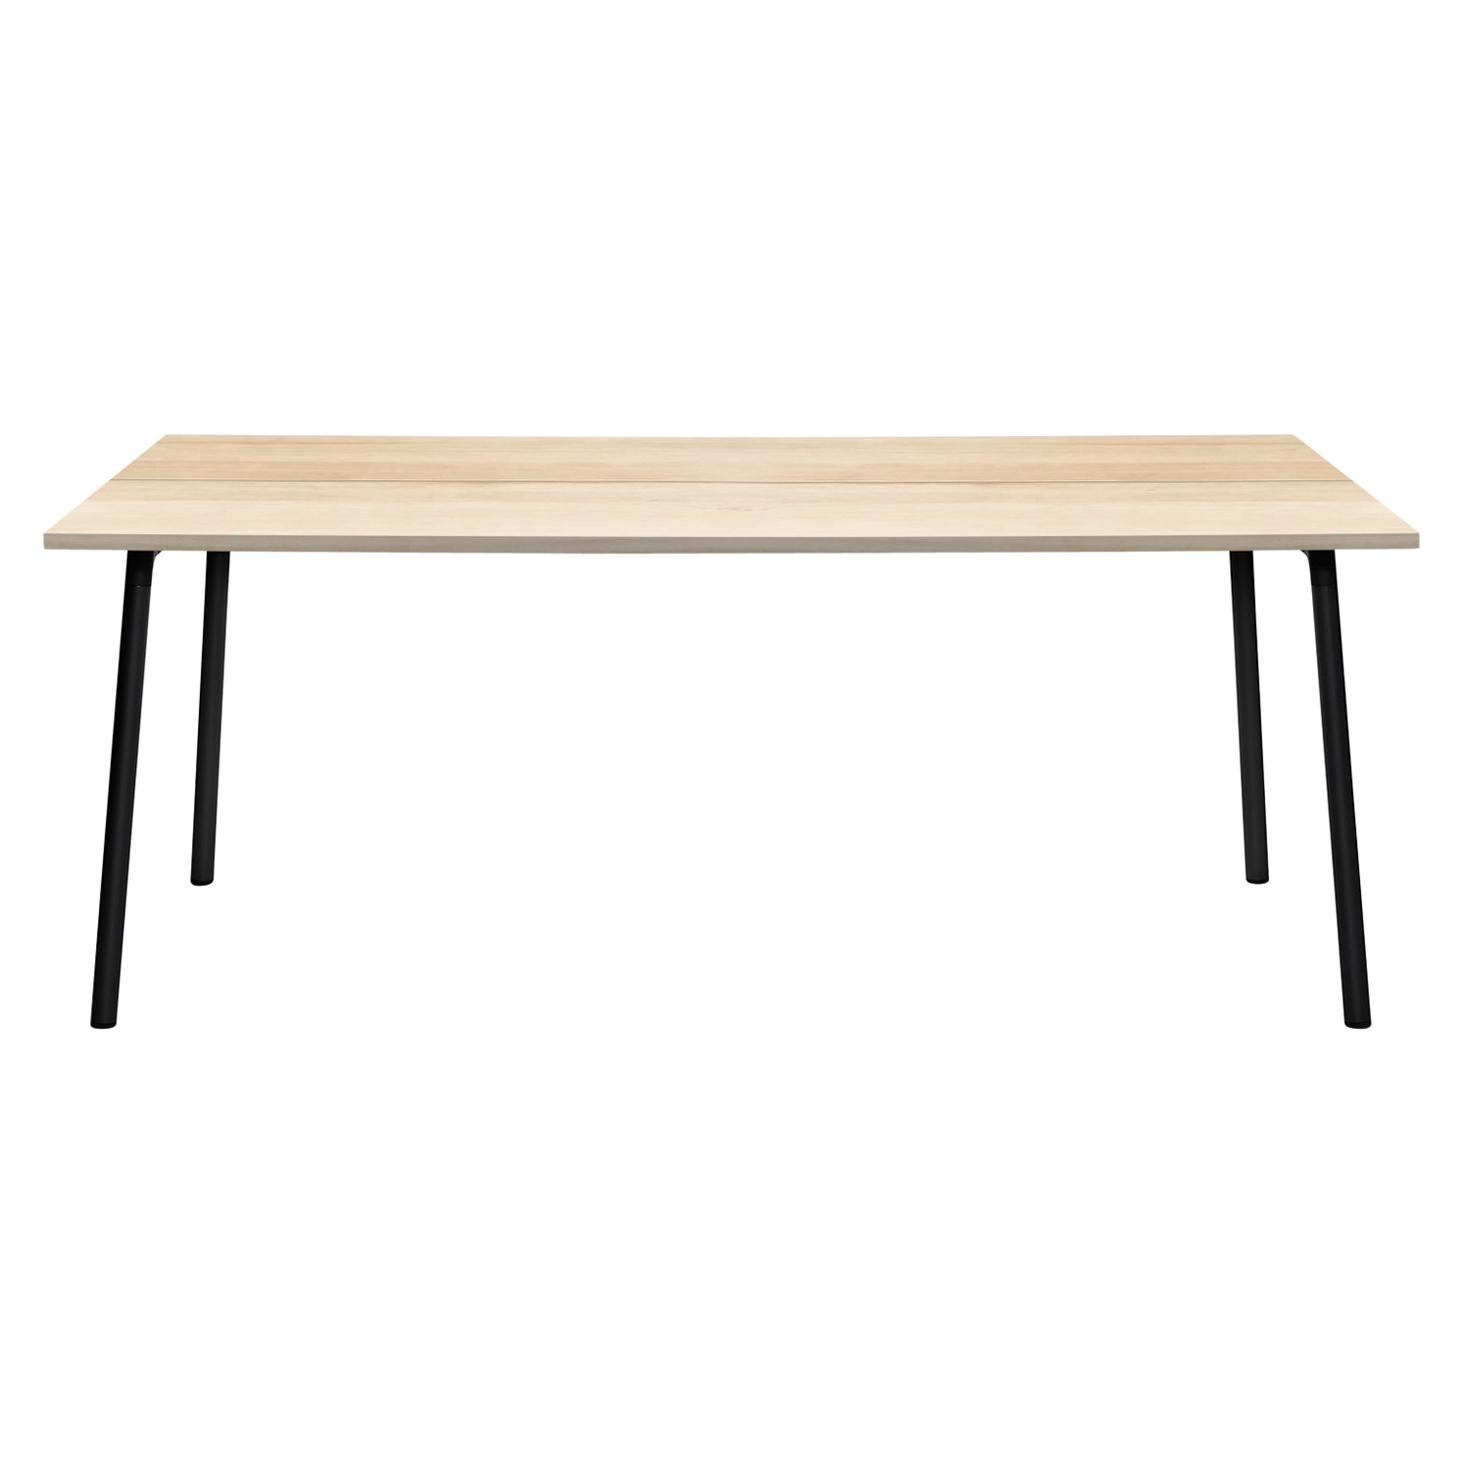 Emeco Run 72" Table with Black Frame & Wood Top by Sam Hecht and Kim Colin